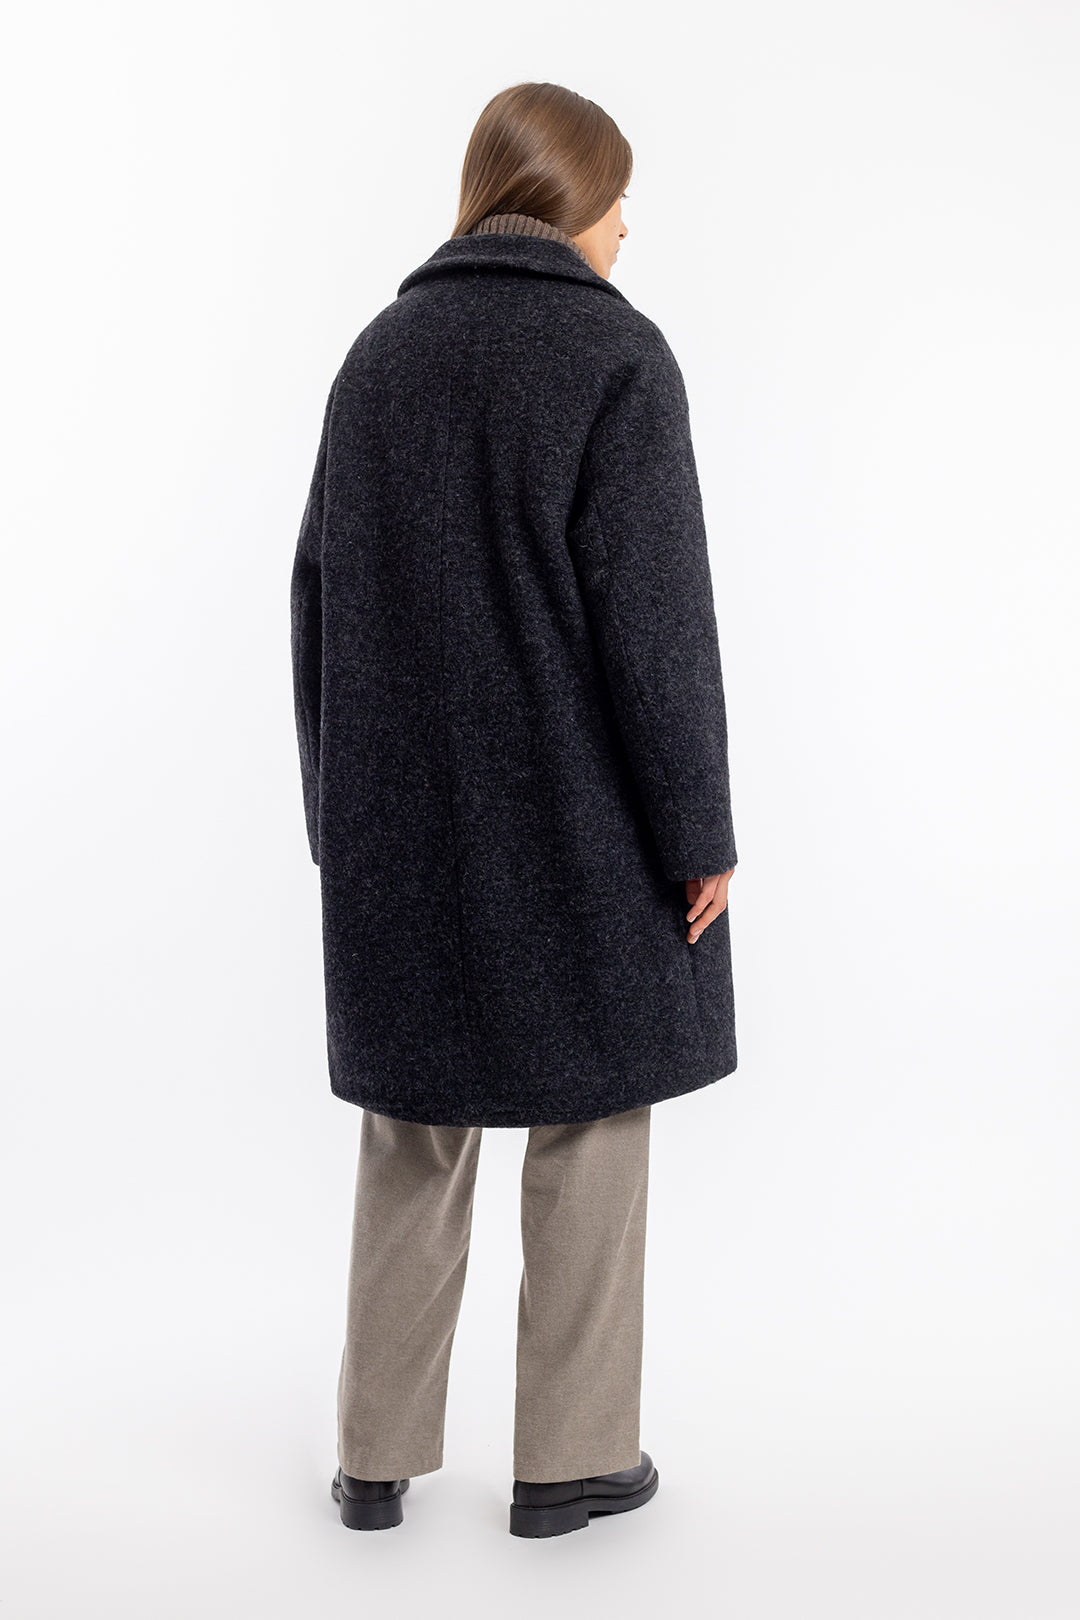 Coat made of organic wool blend - anthracite by Rotholz